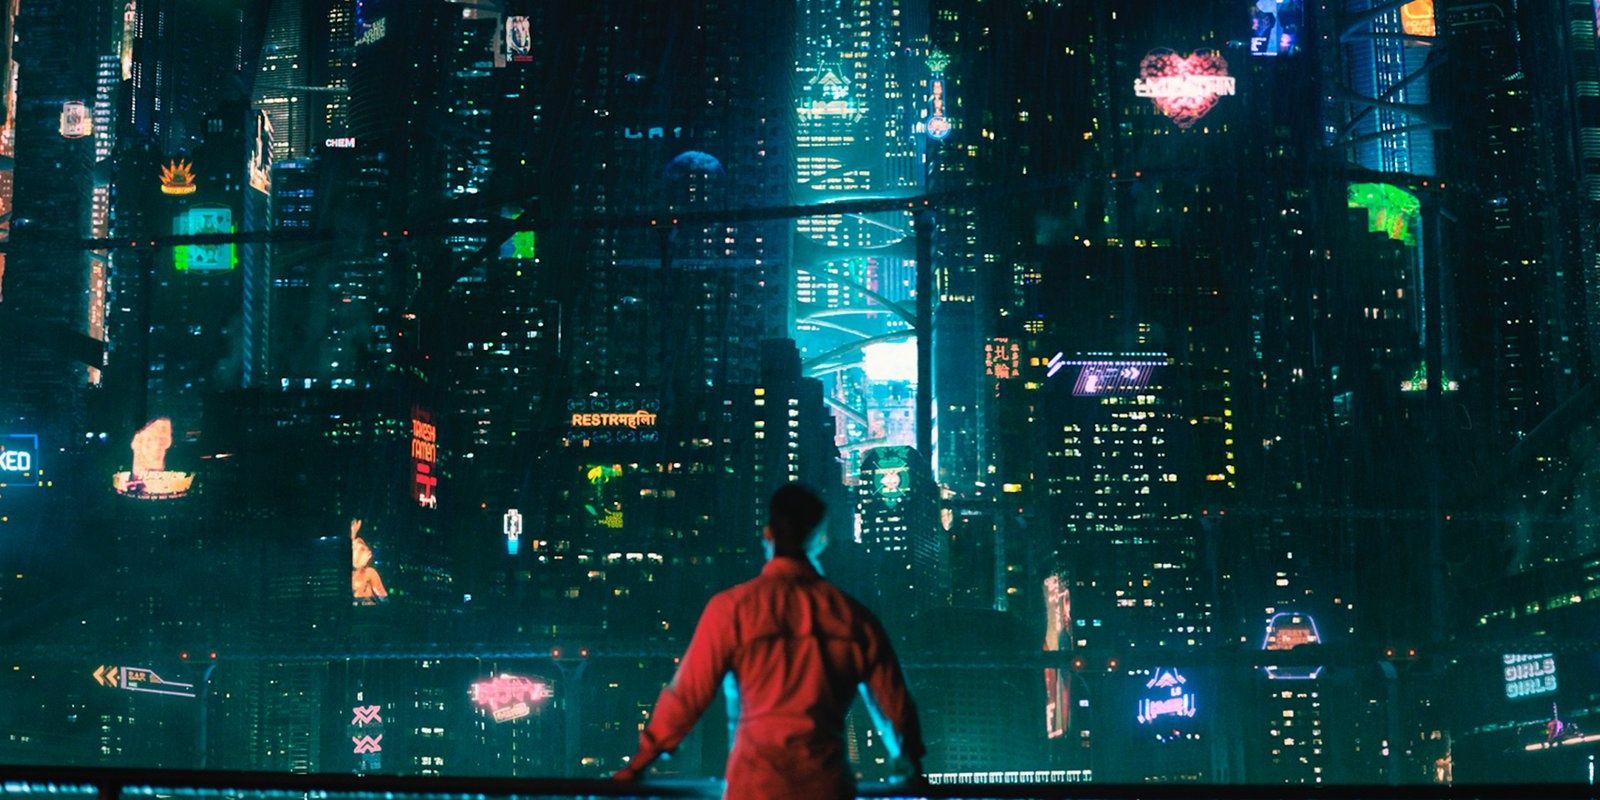 altered carbon image kovacs standing with back to the cemra facing city skyscrapers